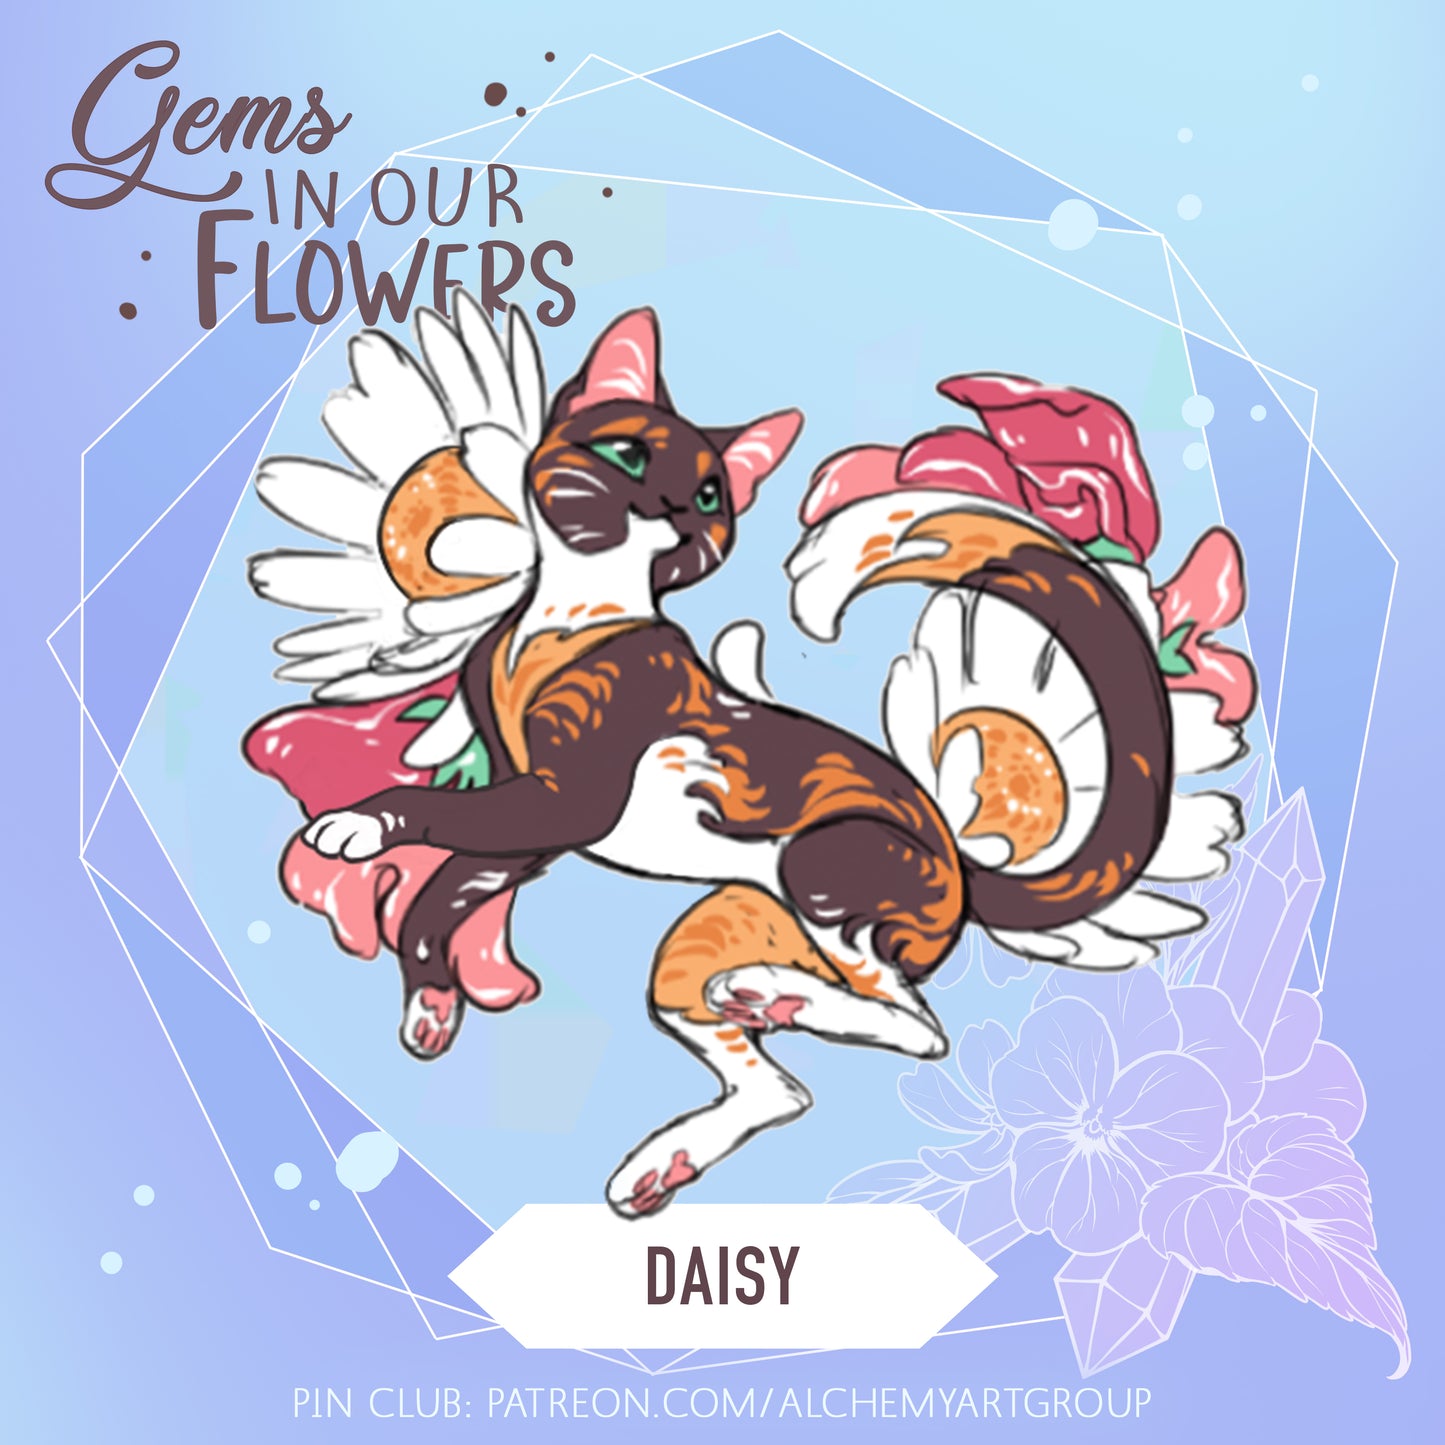 [Gems in our Flowers] Daisy - April Flower